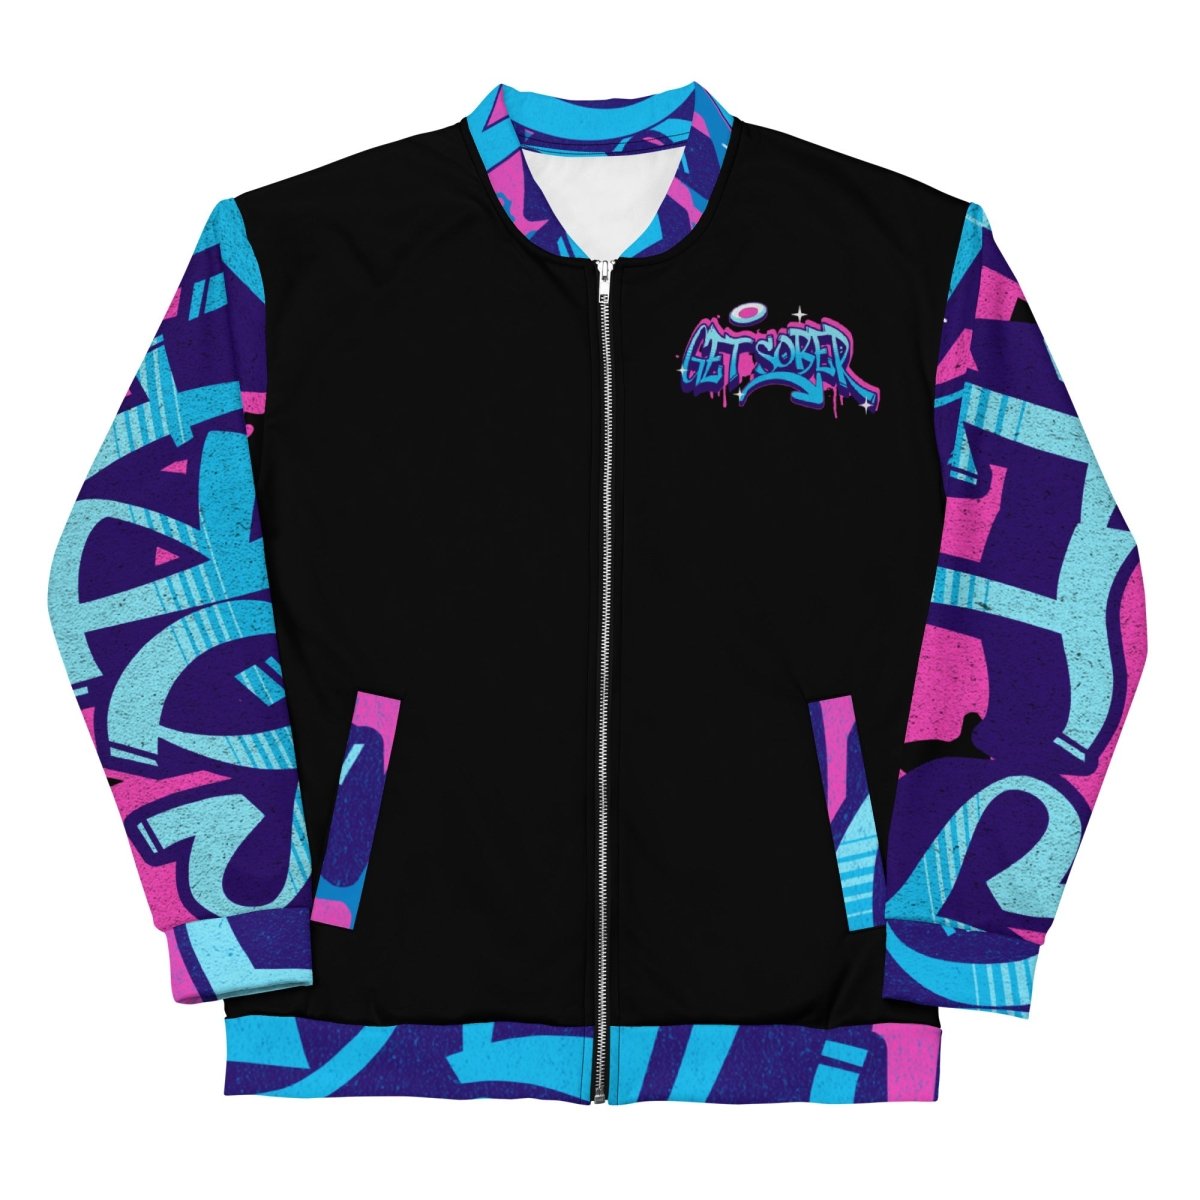 "Get Sober" Graffiti-Style Bomber Jacket: Embracing Recovery with Edgy Style - XS | Sobervation